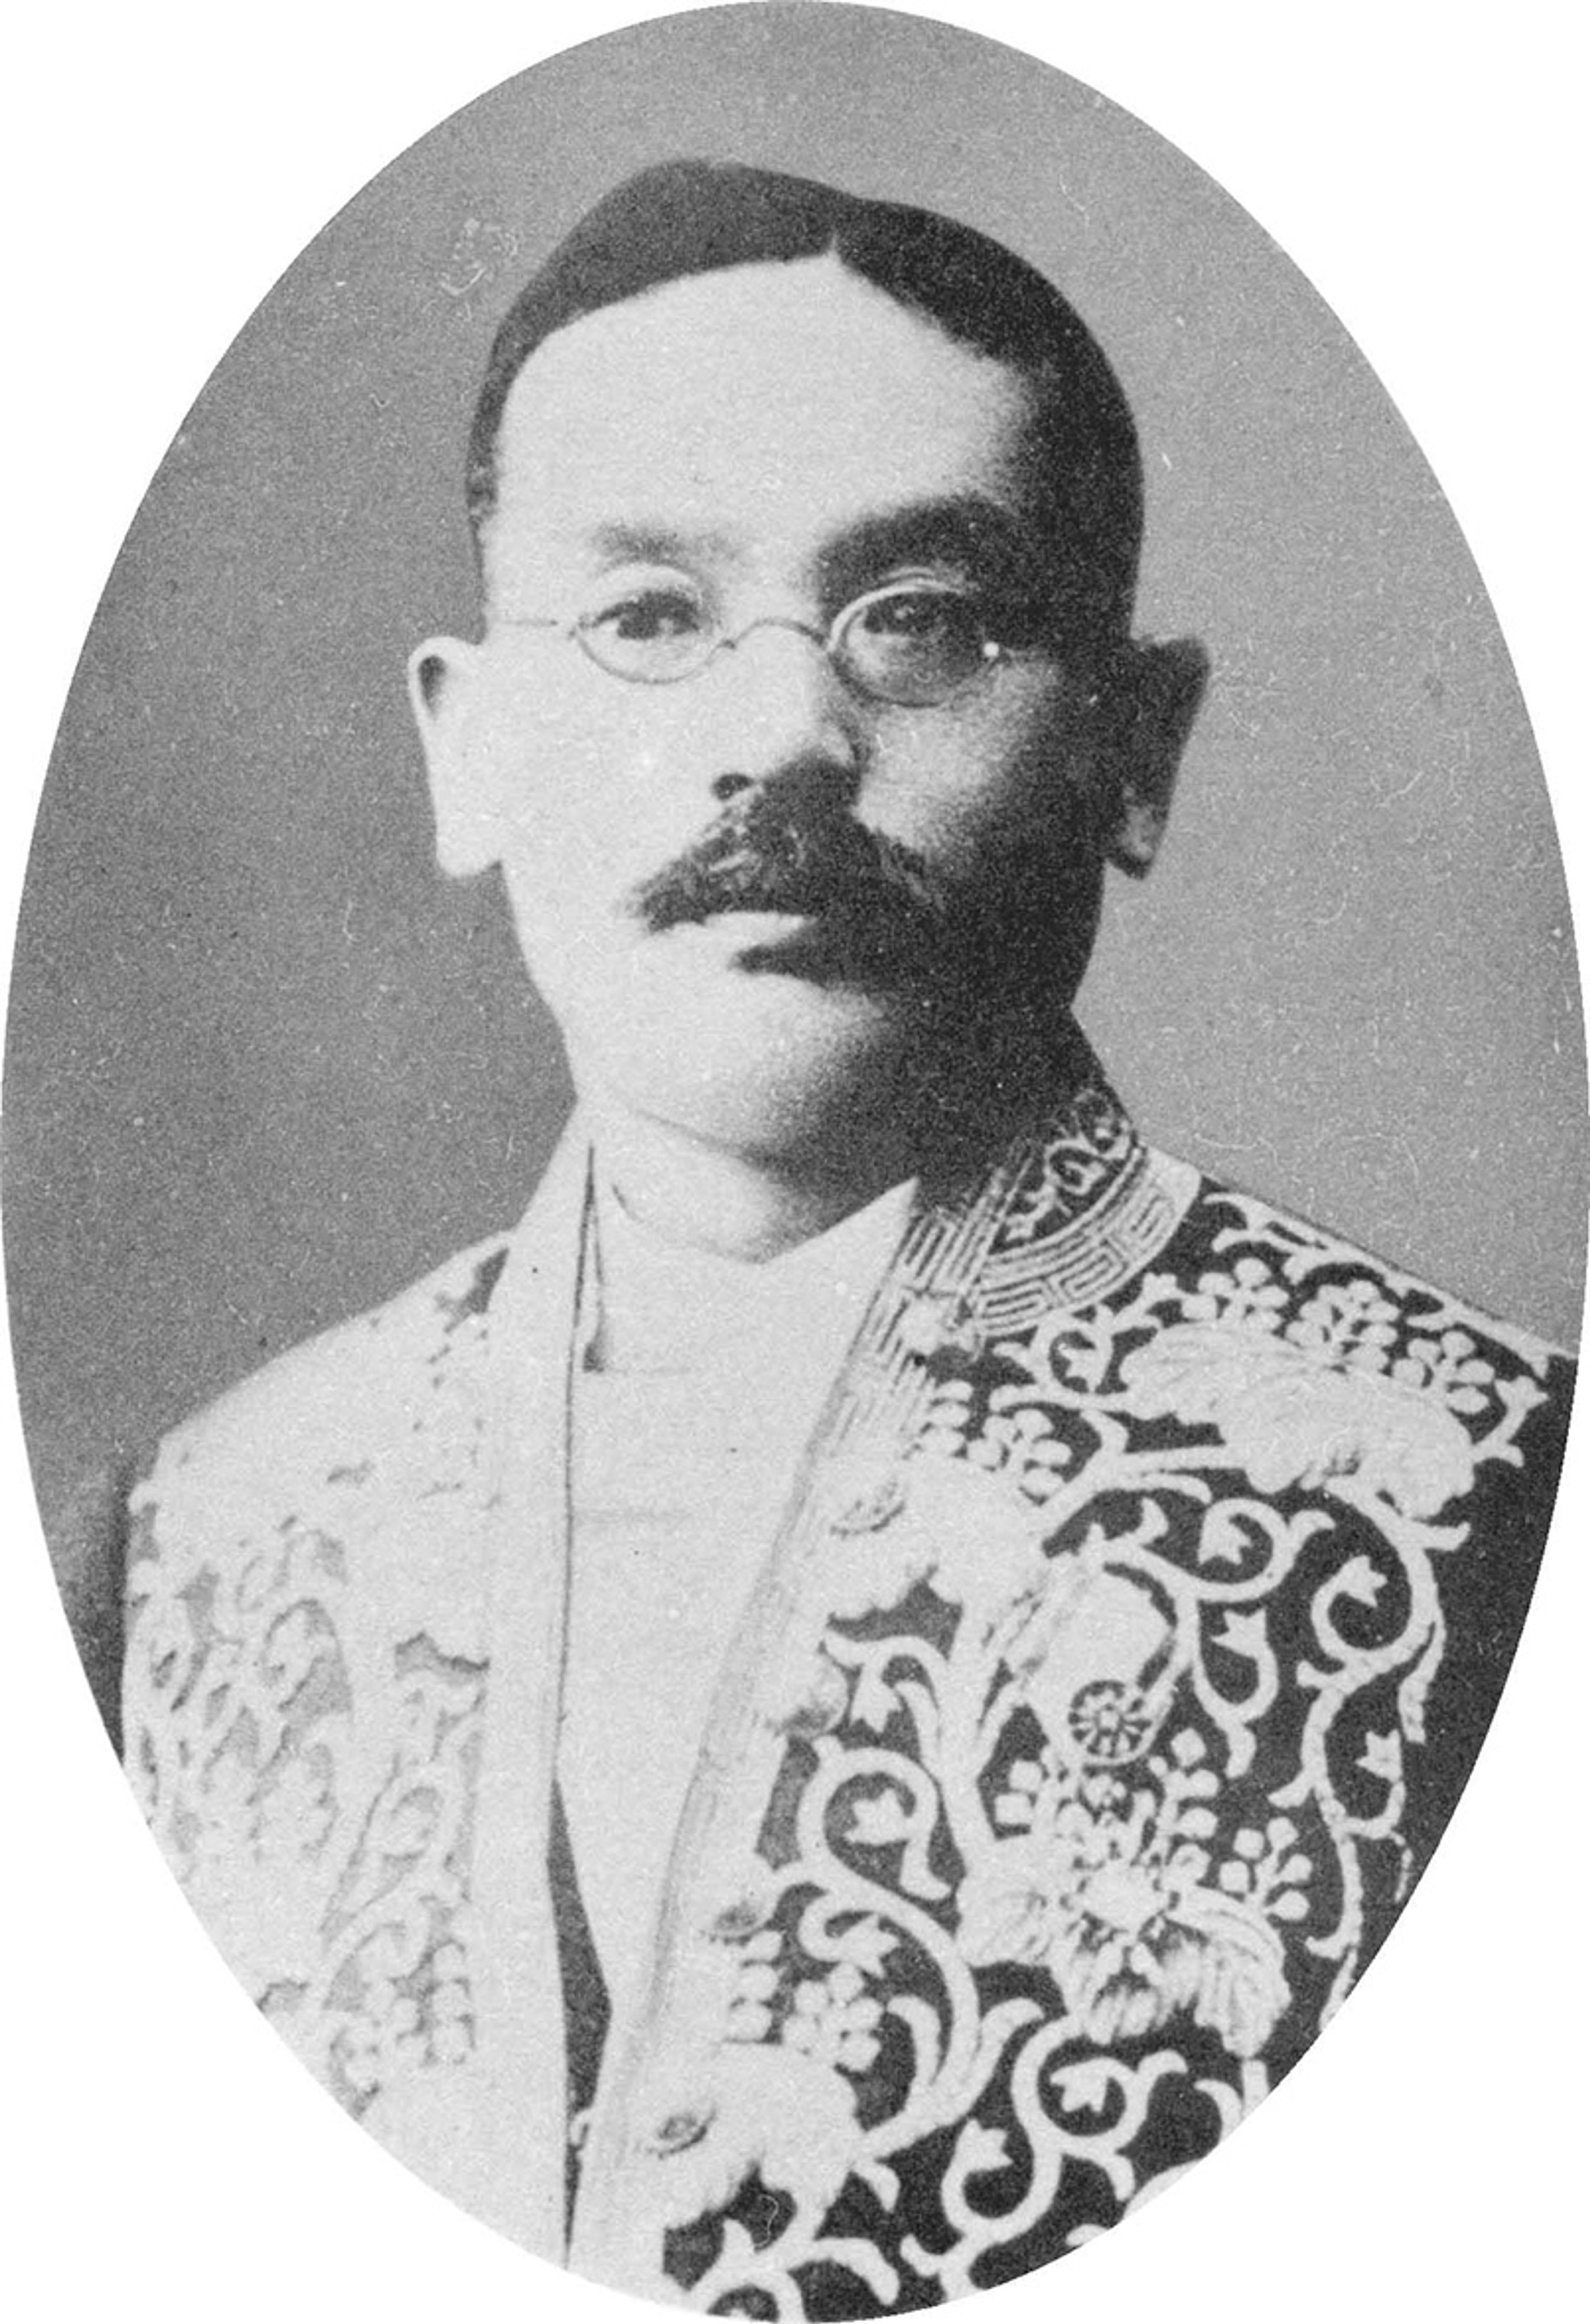 Black and white portrait of a man with a moustache and glasses, wearing an ornate, embroidered jacket with intricate floral patterns and animal motifs. The image is oval-shaped, with the man looking directly at the camera against a plain background.